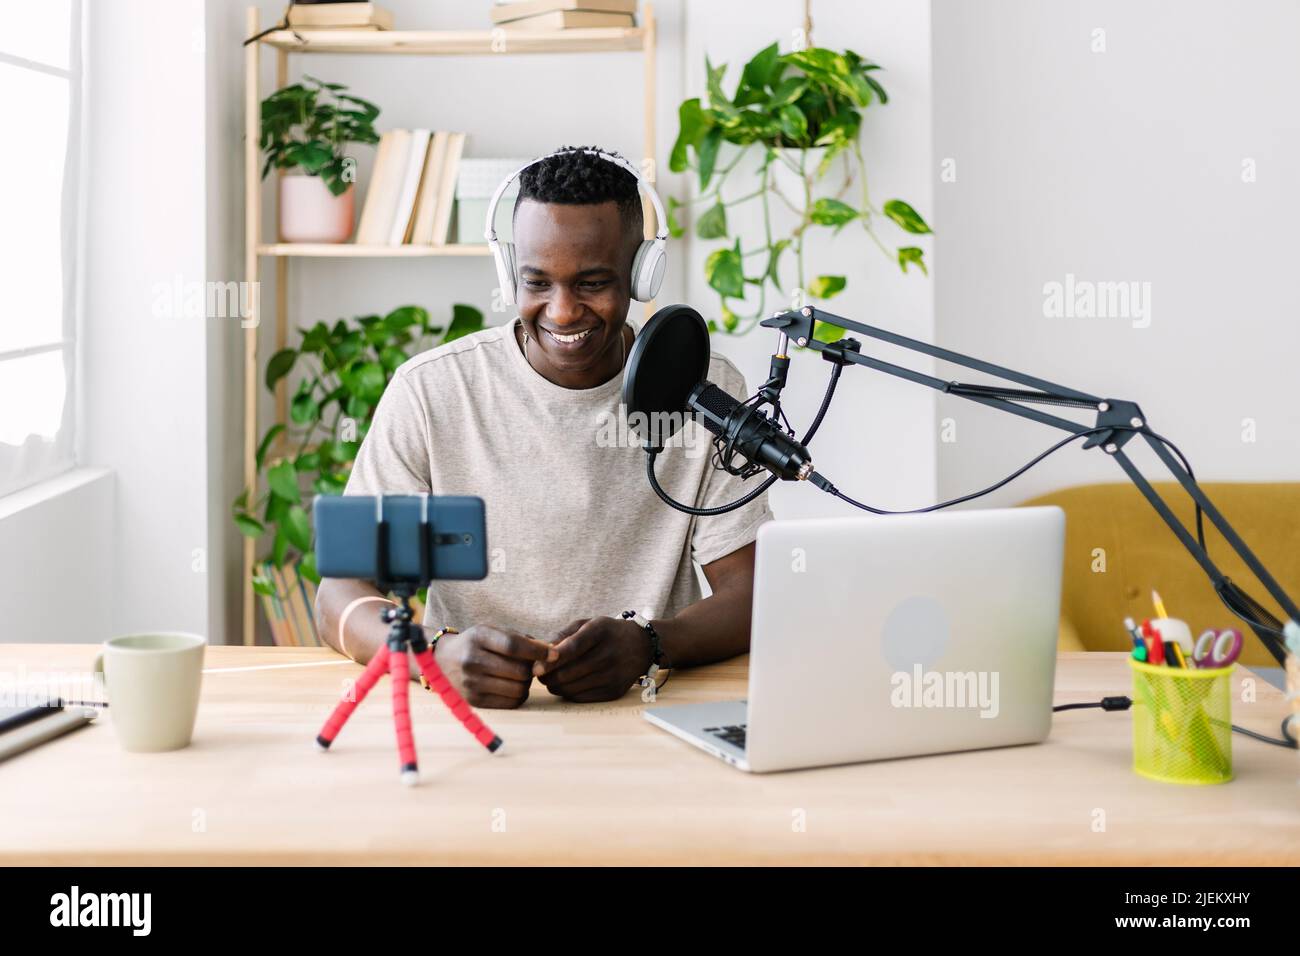 Young adult african man streaming live video at home studio Stock Photo